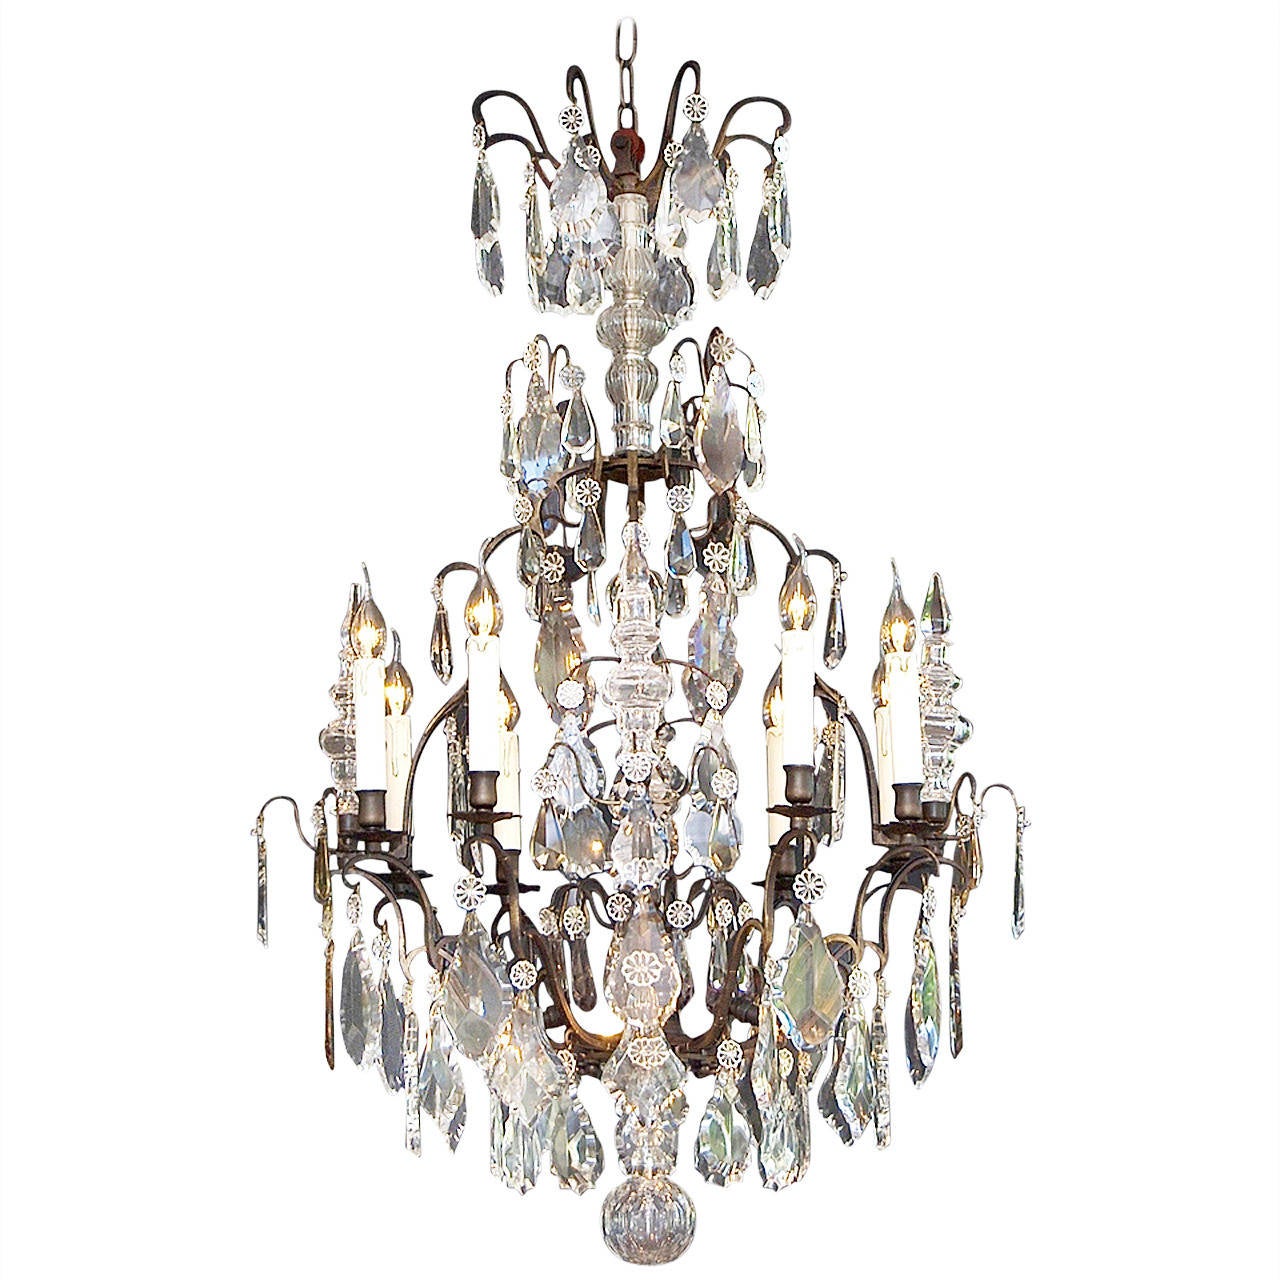 Early 20th Century French Crystal Chandelier with a Dark Patina For Sale